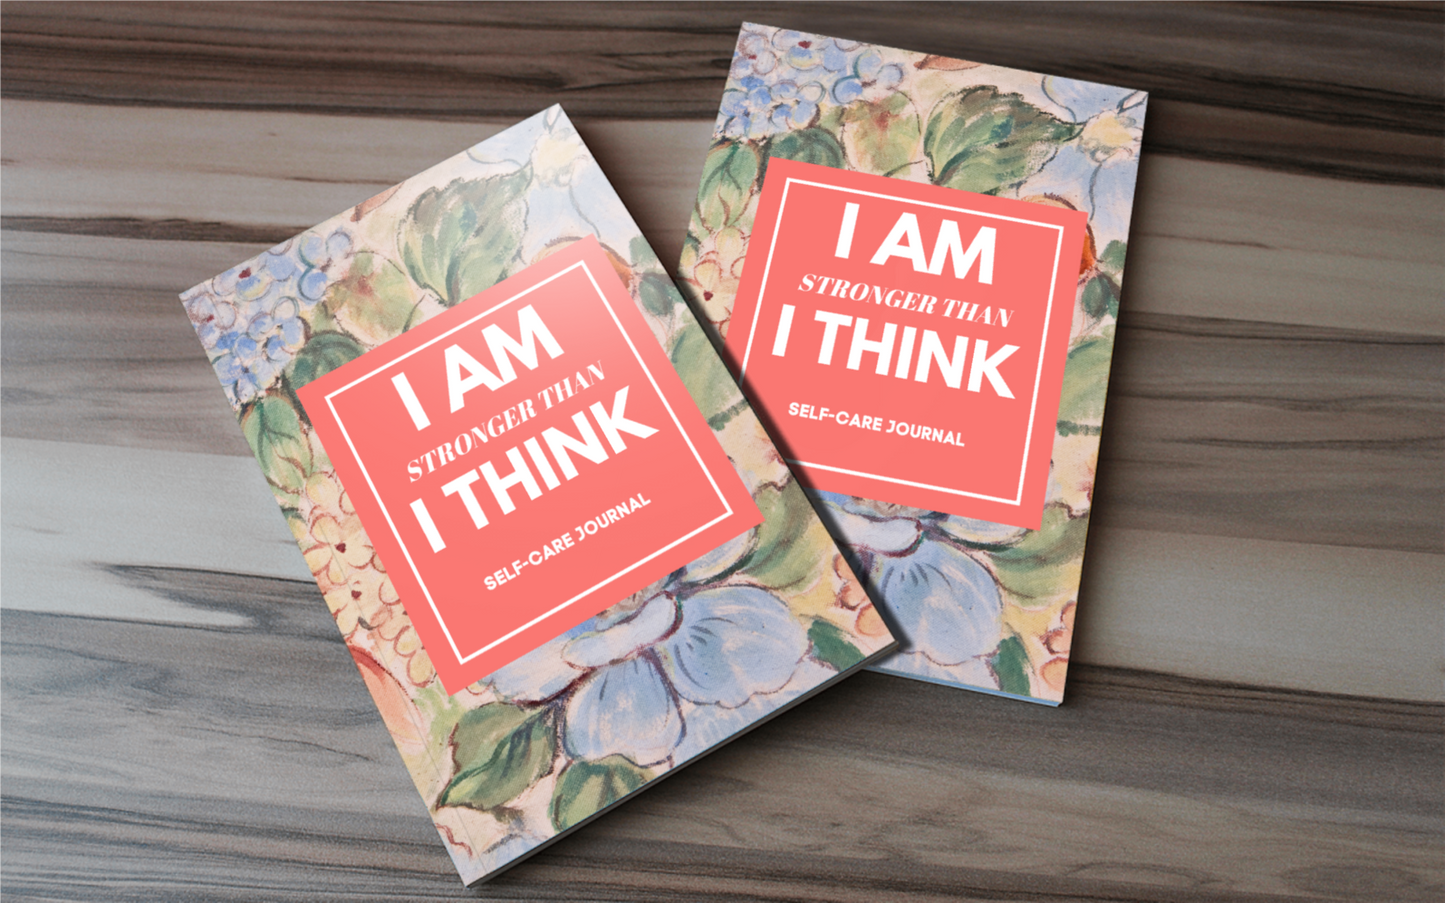 I AM Stronger Than I Think Self-Care Journal for KDP Amazon & The Book Patch